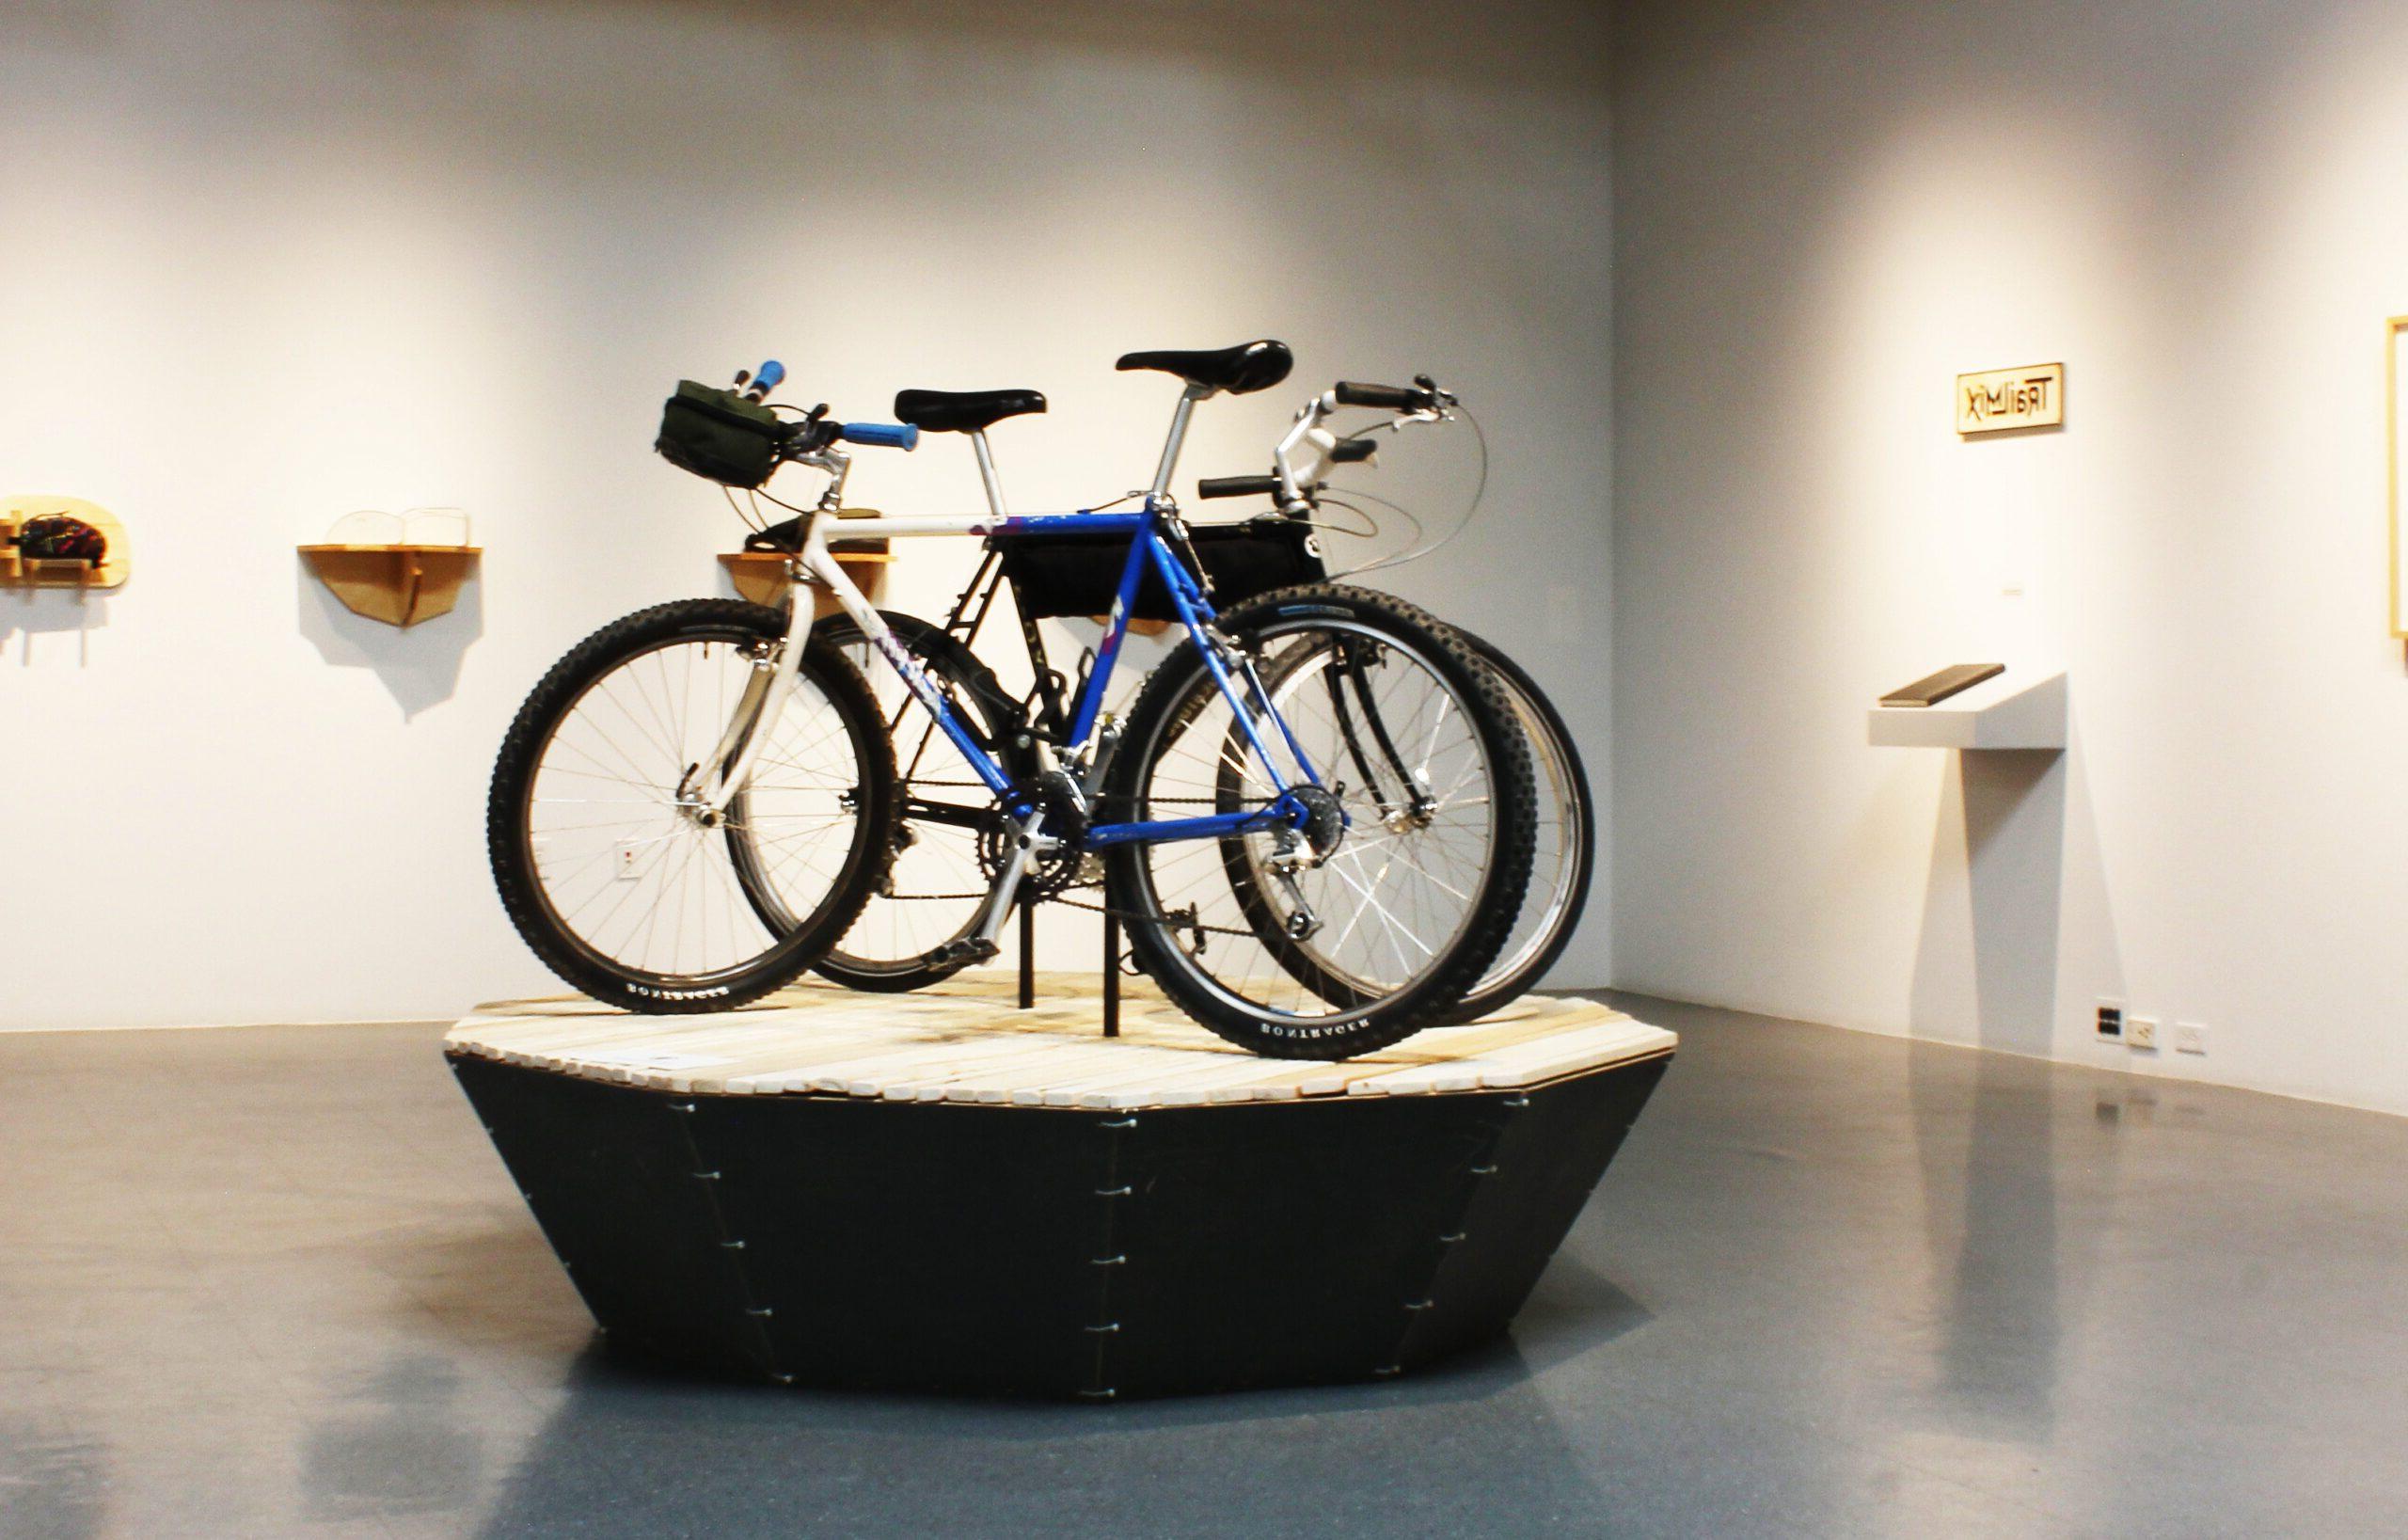 Gallery space with tall ceilings two bicycles outfitted with gear.